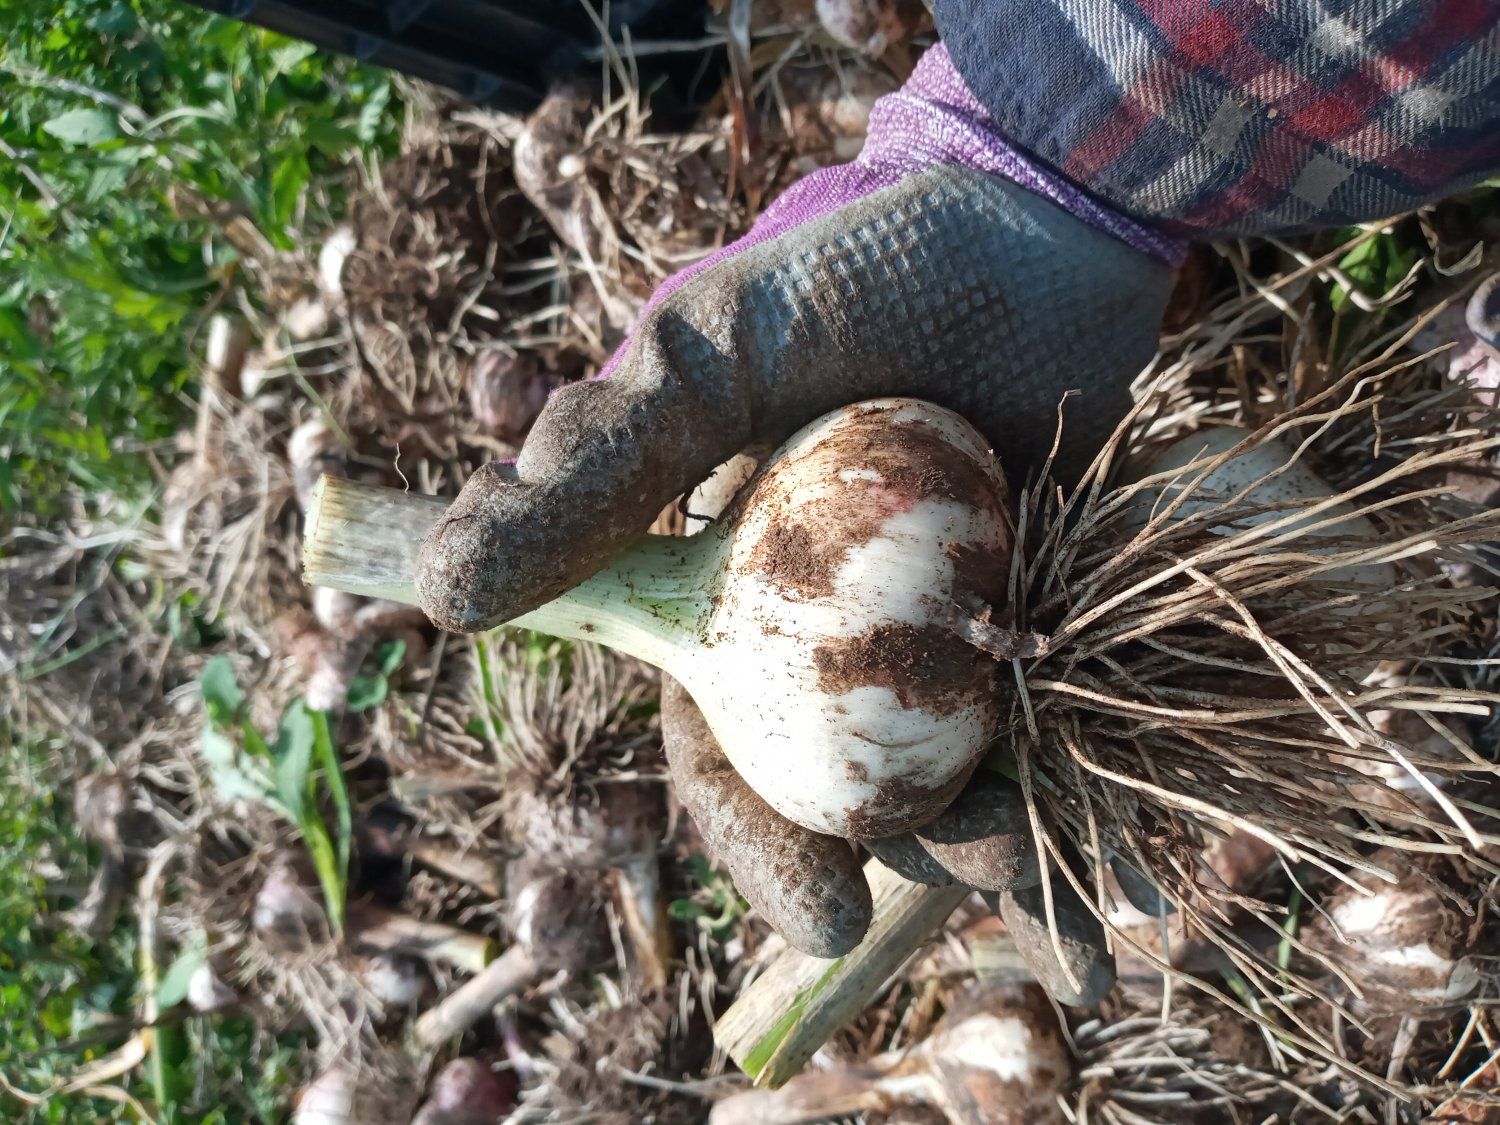 Farm Happenings for August 10, 2021 - The Garlic Queen